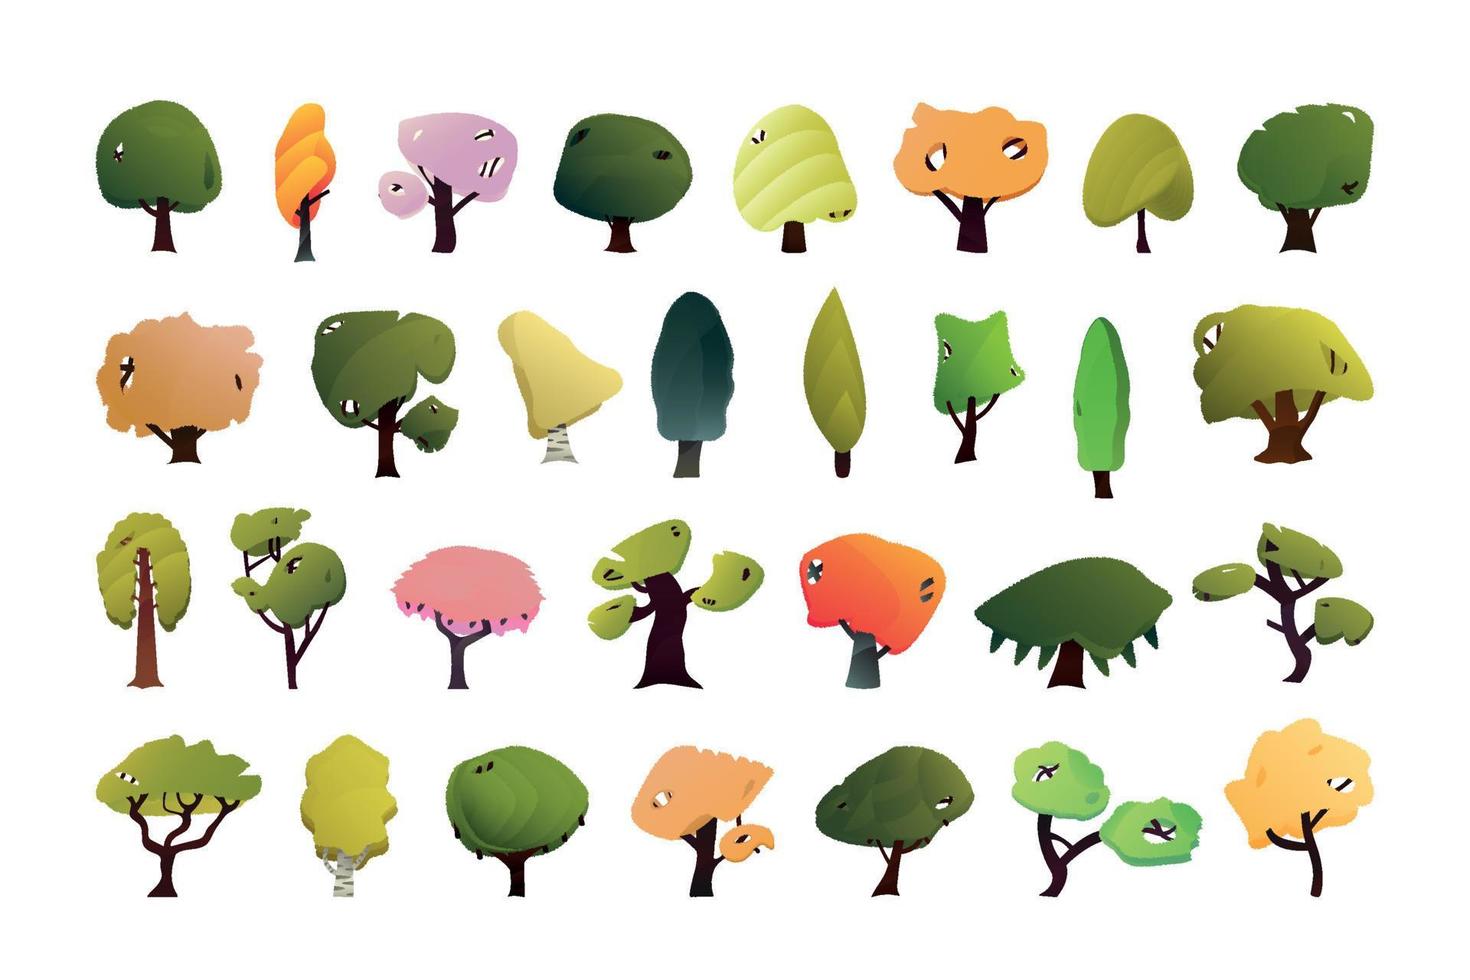 Illustrations of Colorful Trees vector